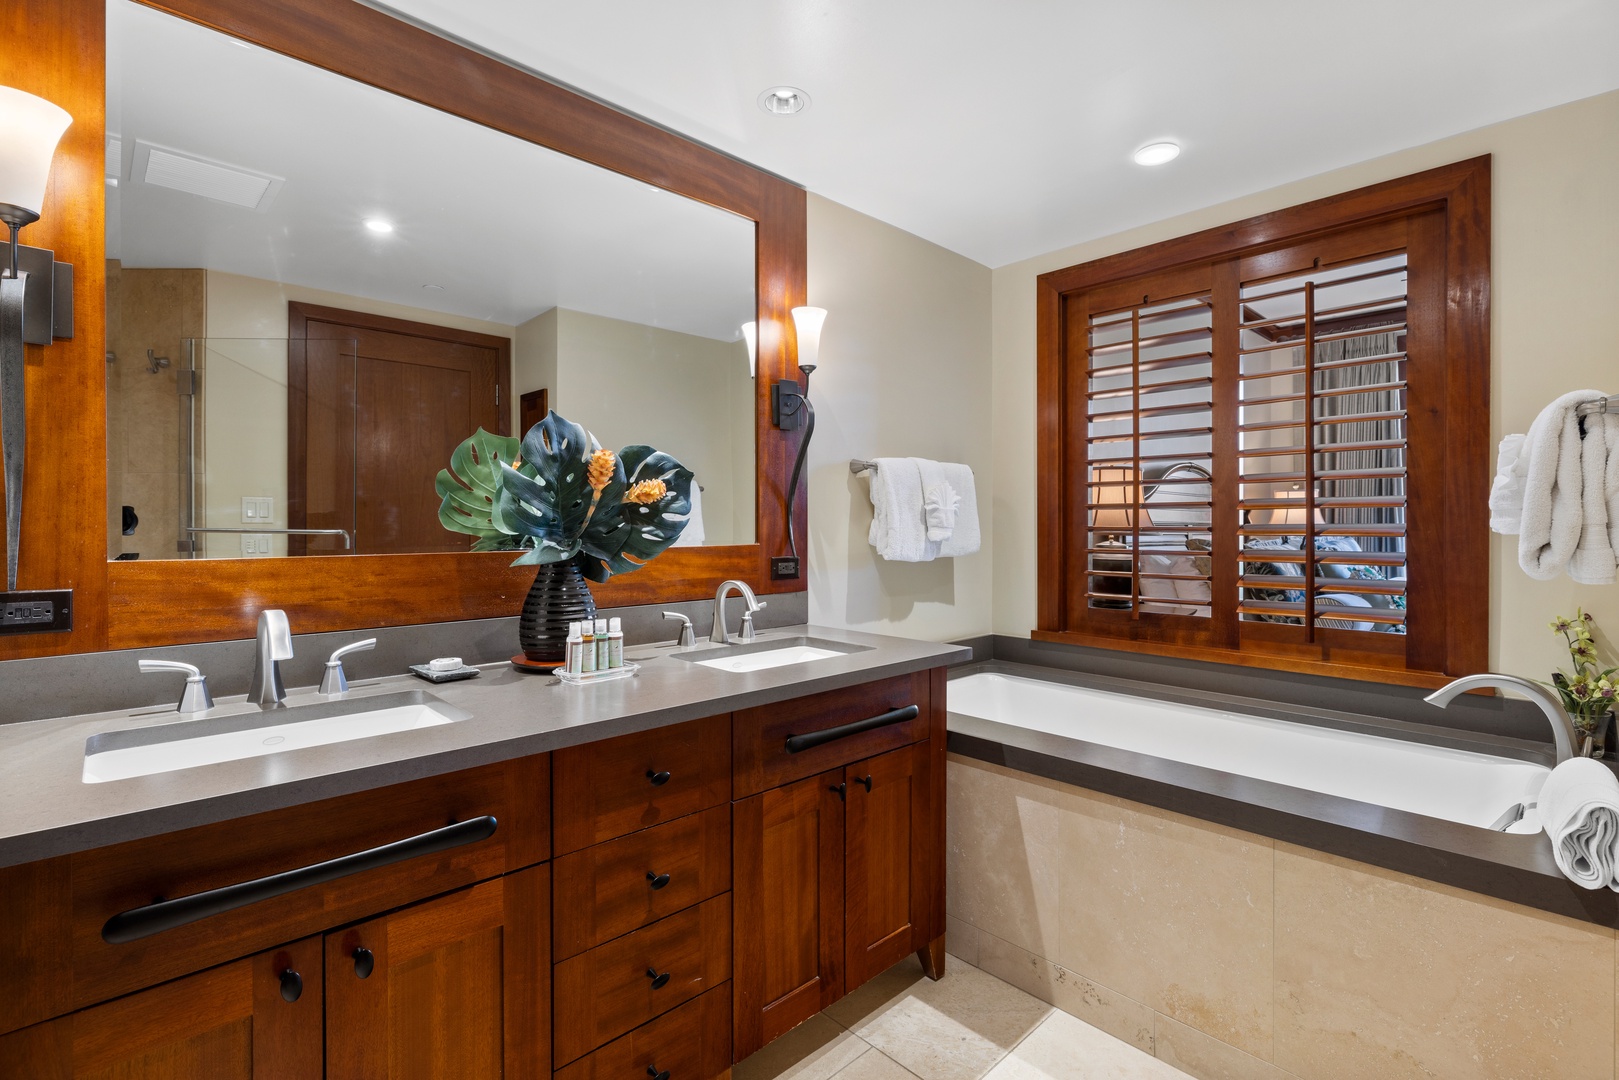 Kapolei Vacation Rentals, Ko Olina Beach Villas B602 - The primary guest bathroom features a soaking tub and walk-in shower.